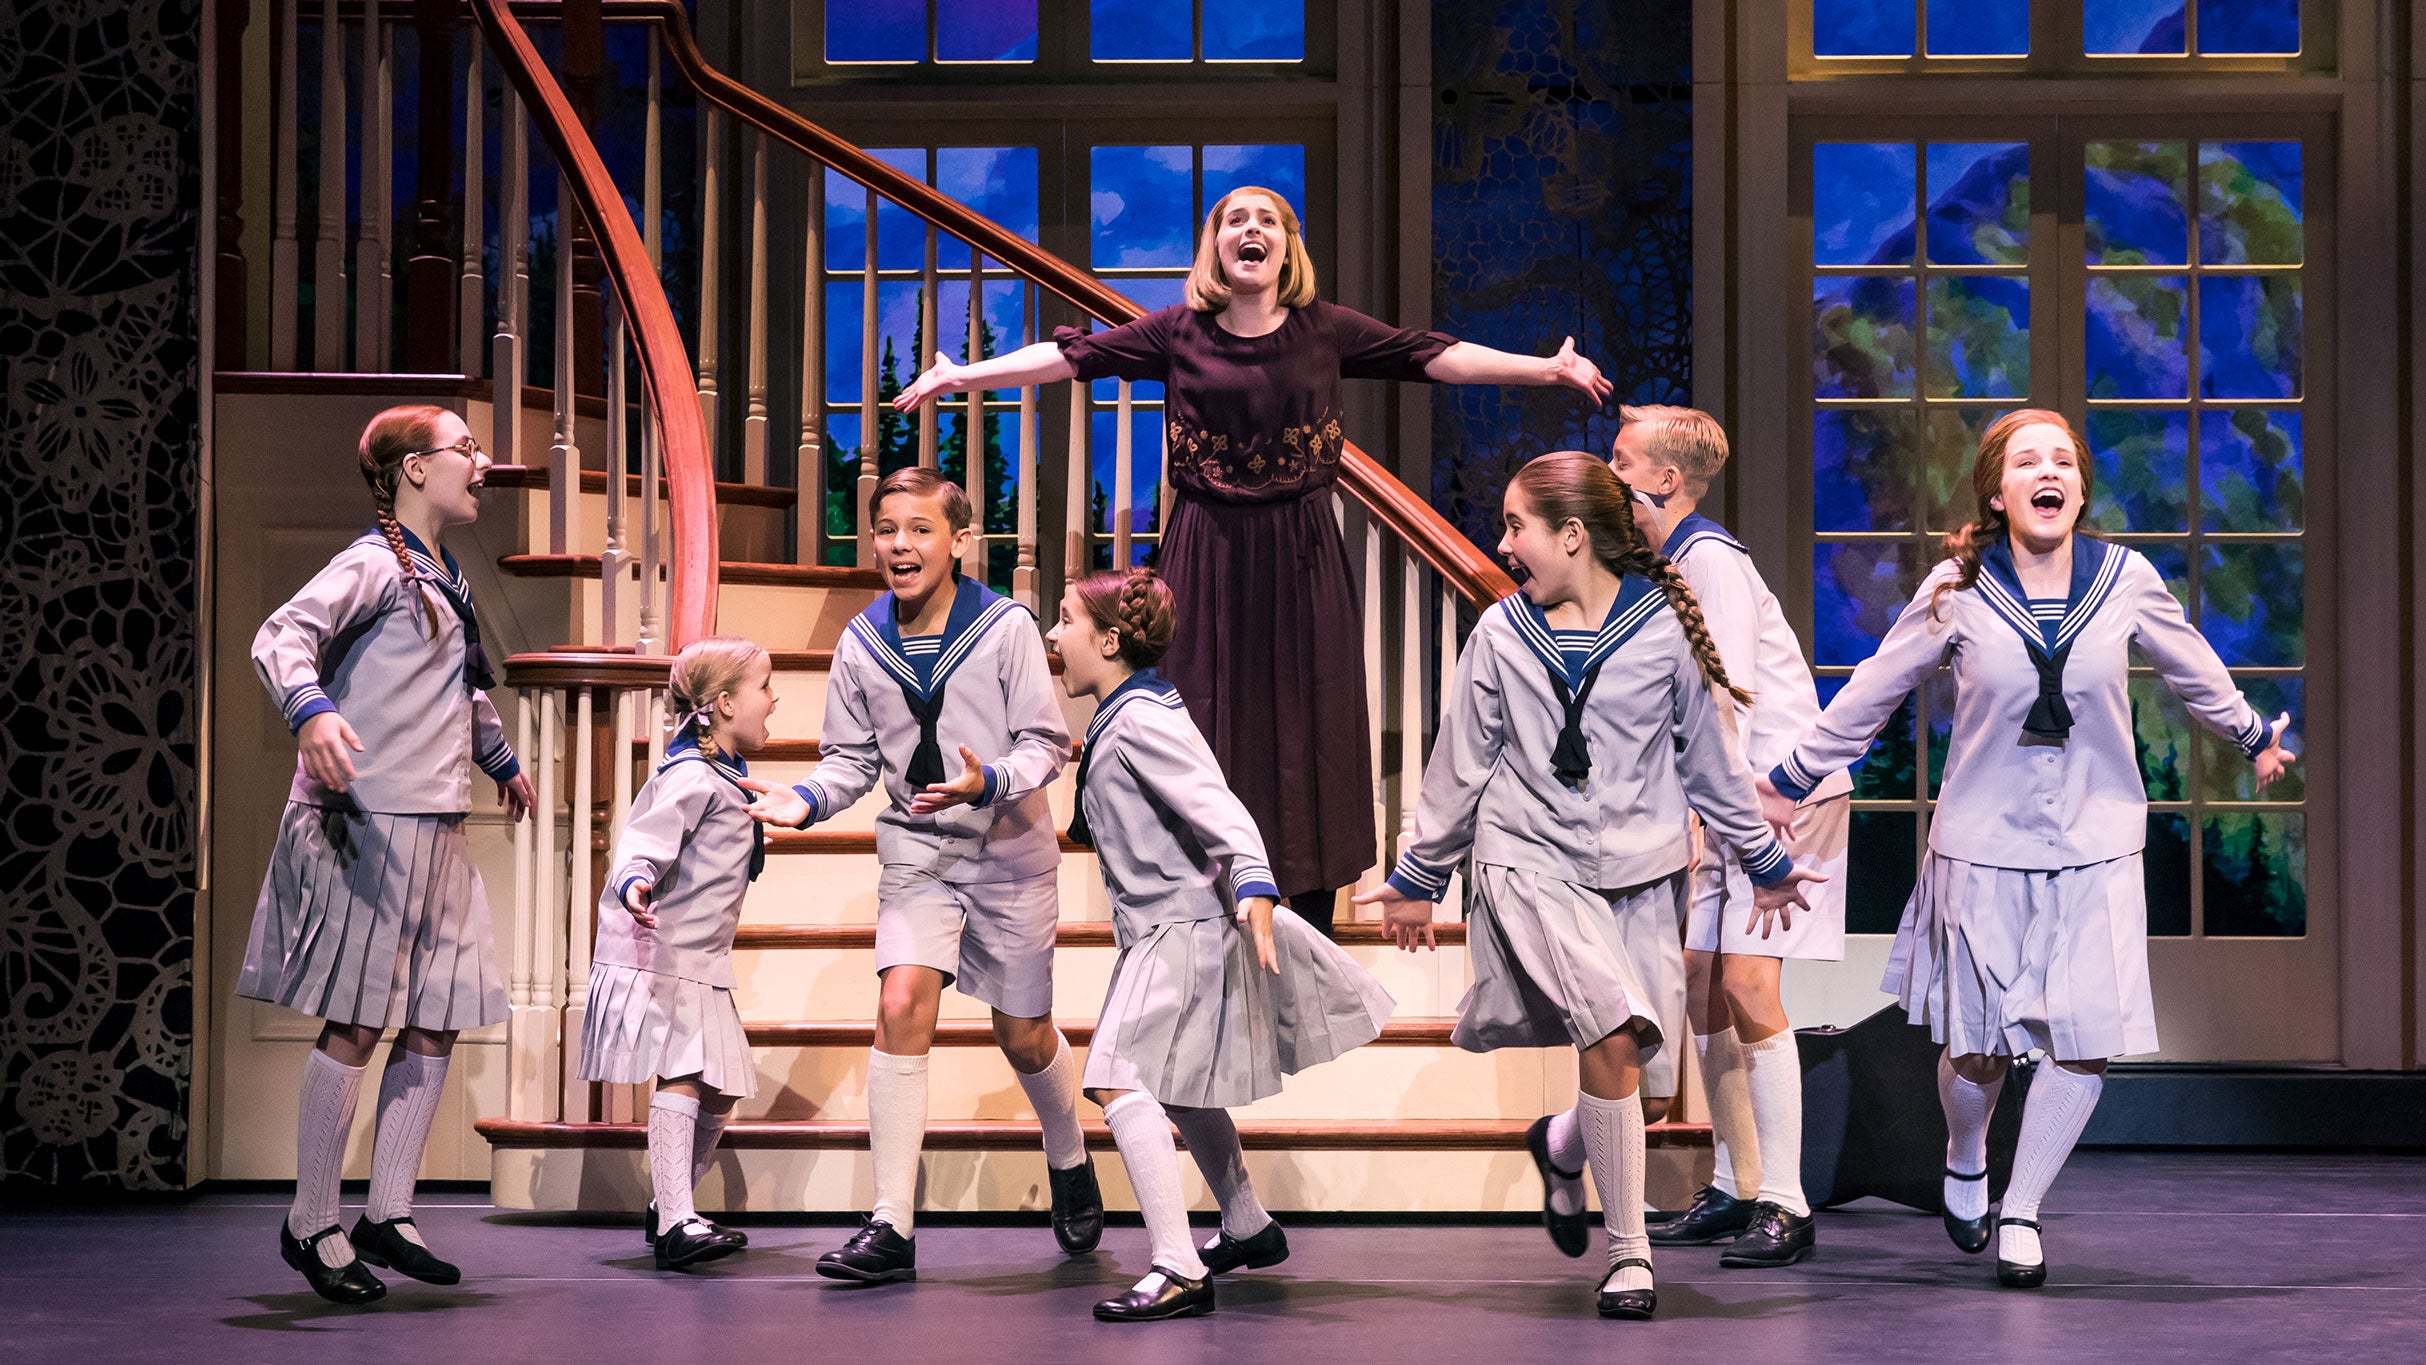 Sound Of Music at High Point Theatre - NC